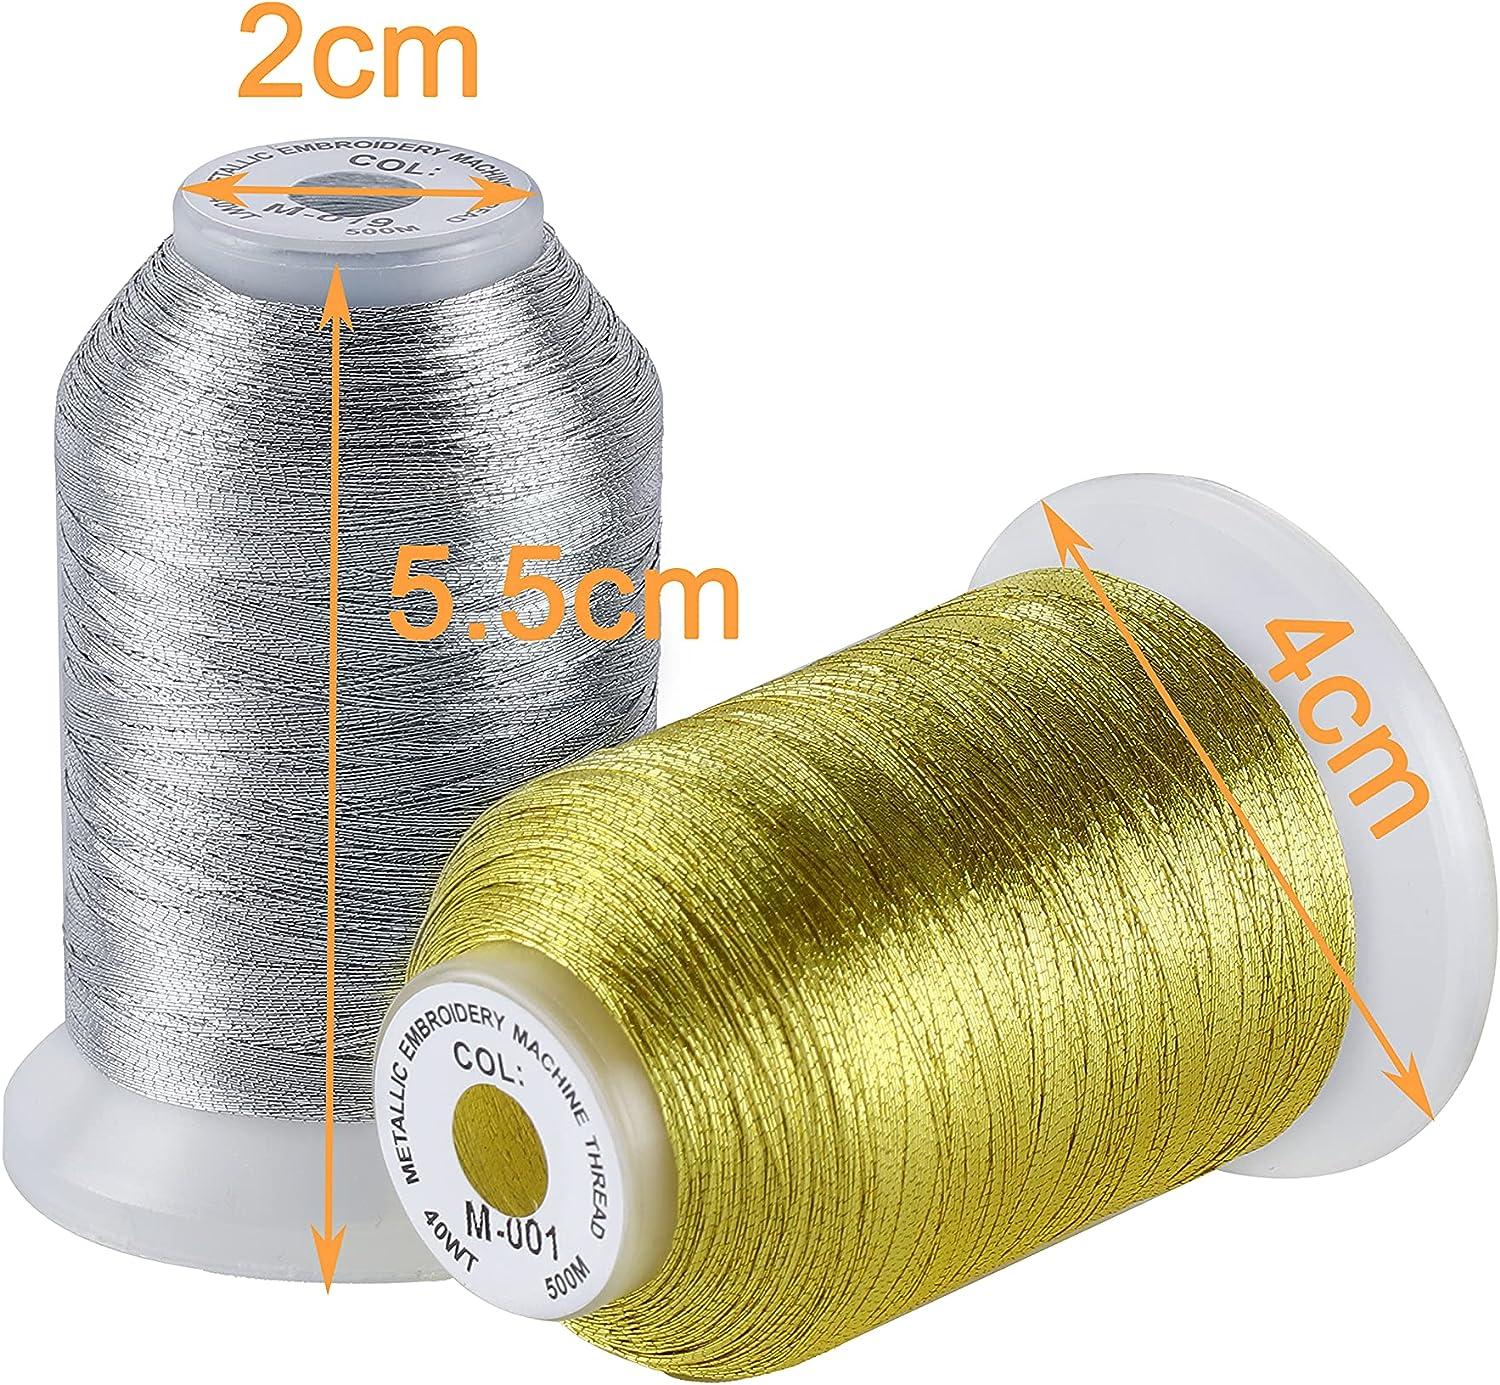 New Brothread 50 Colors Variegated Polyester Embroidery Machine Thread Kit  500M